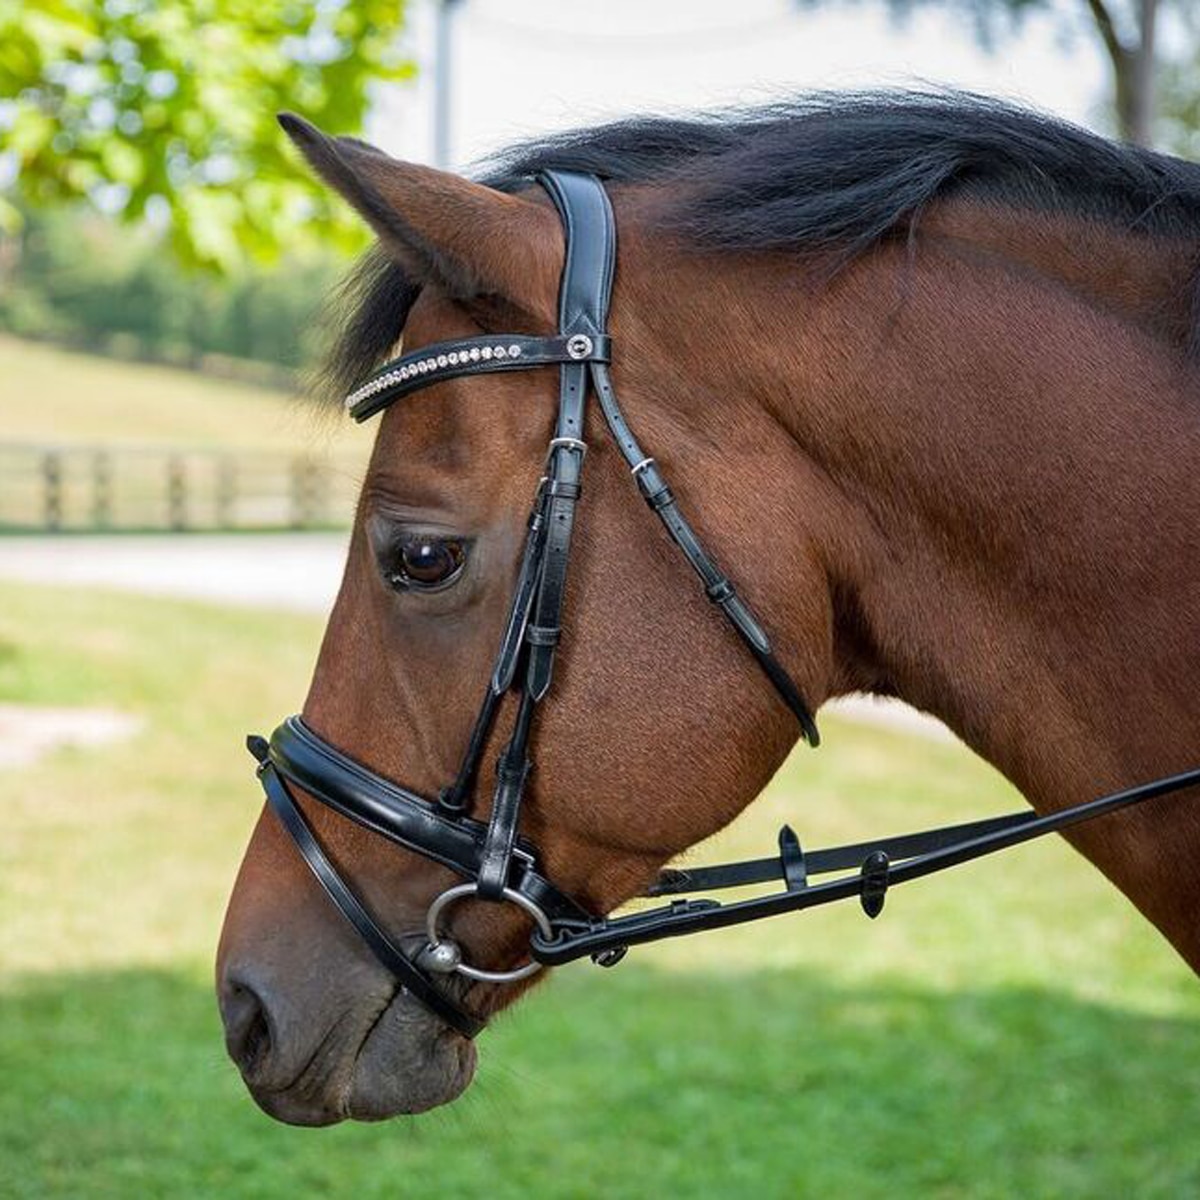 D.A Brand Black Extra Full Horse Bridle w/ Center Buckle Reins Horse Tack 